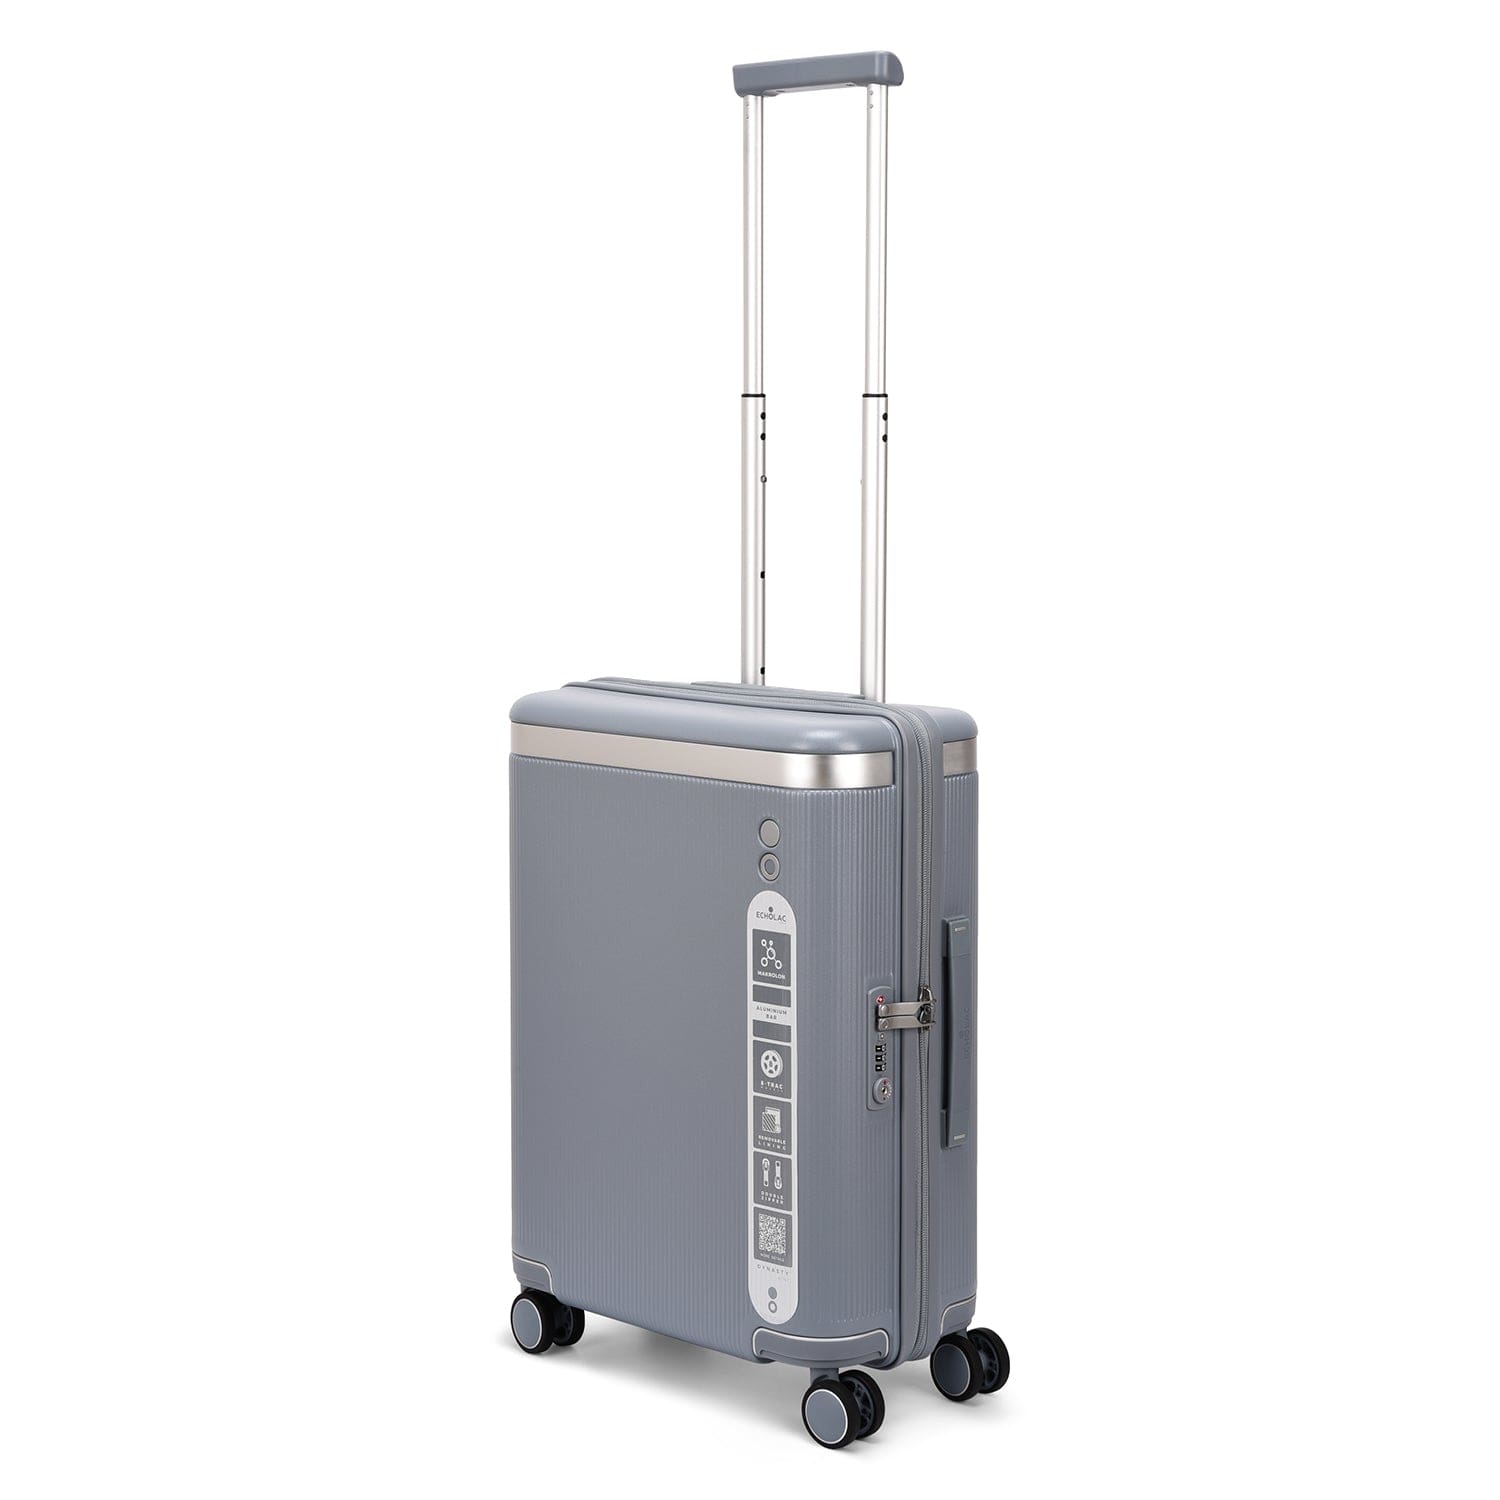 Echolac Dynasty 55cm Hardcase Non-Expandable 4 Double Wheel Cabin Luggage Trolley Ice Blue - PC142